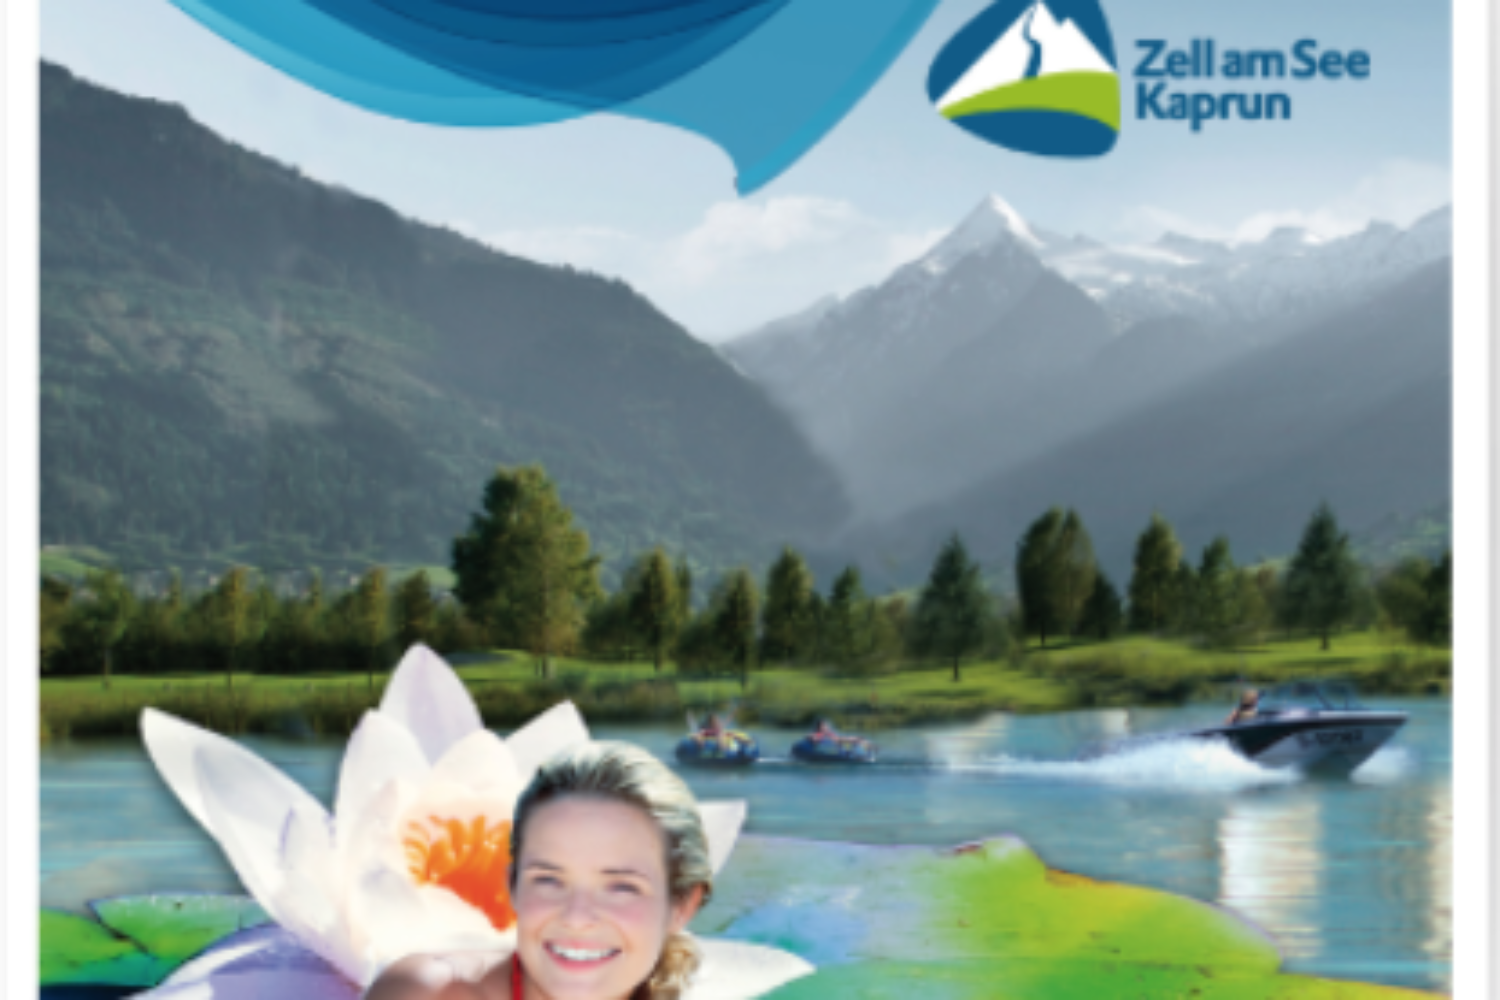 Zell am See Kampagne